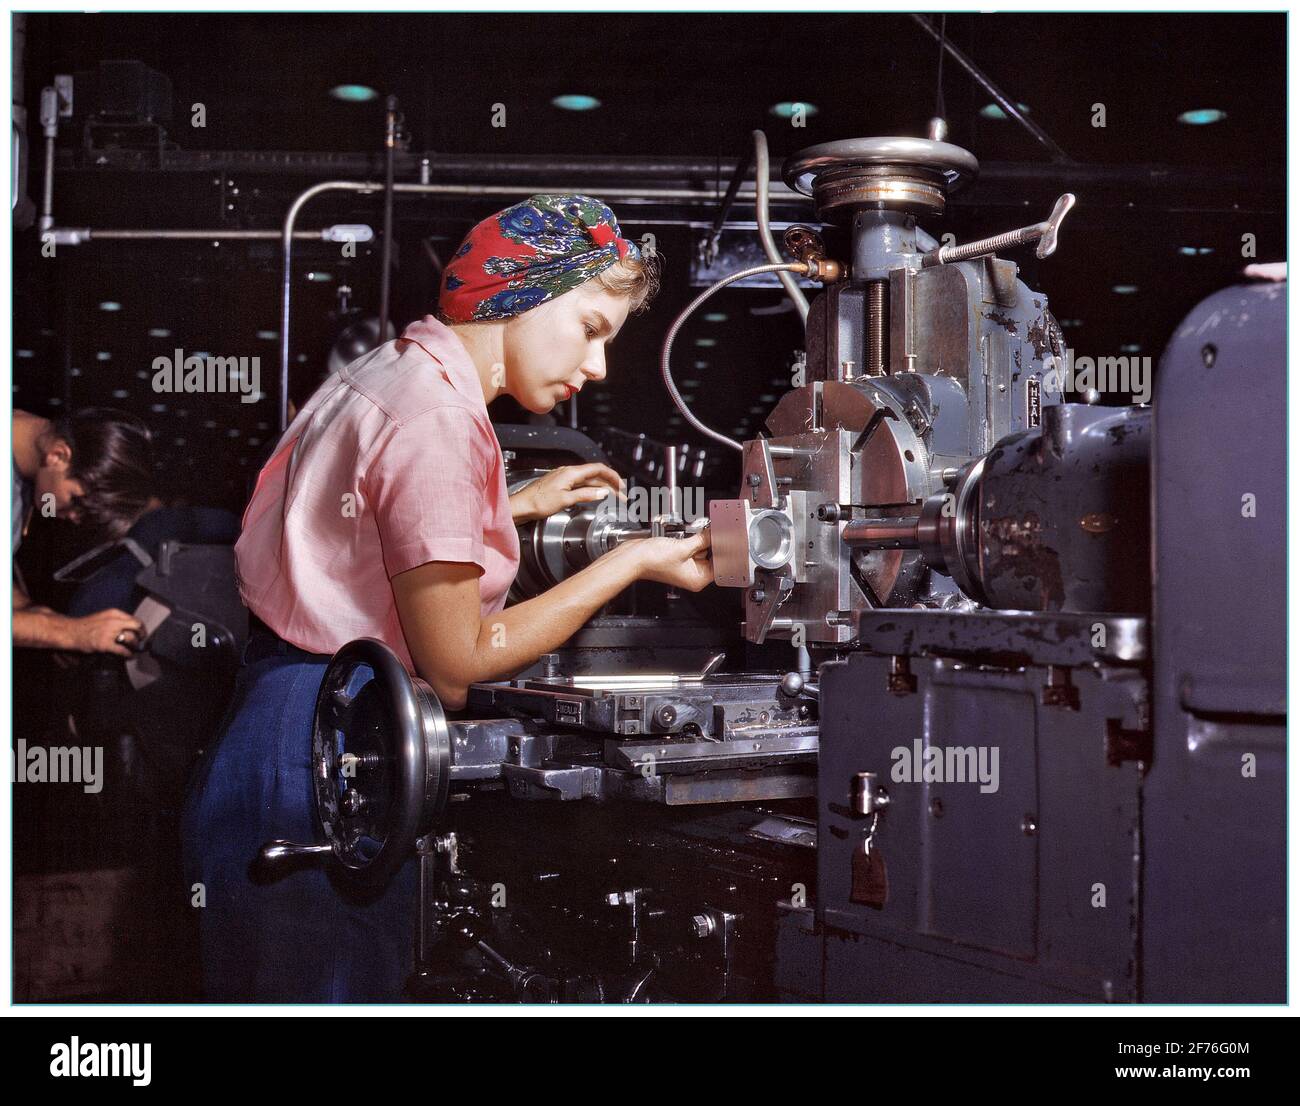 WW2 America War work production October 1942. “Women become skilled shop technicians after careful training in the school at the Douglas Aircraft Company plant in Long Beach, California. Planes made here include the B-17F Flying Fortress heavy bomber, A-20 assault bomber and C-47 transport.” Stock Photo